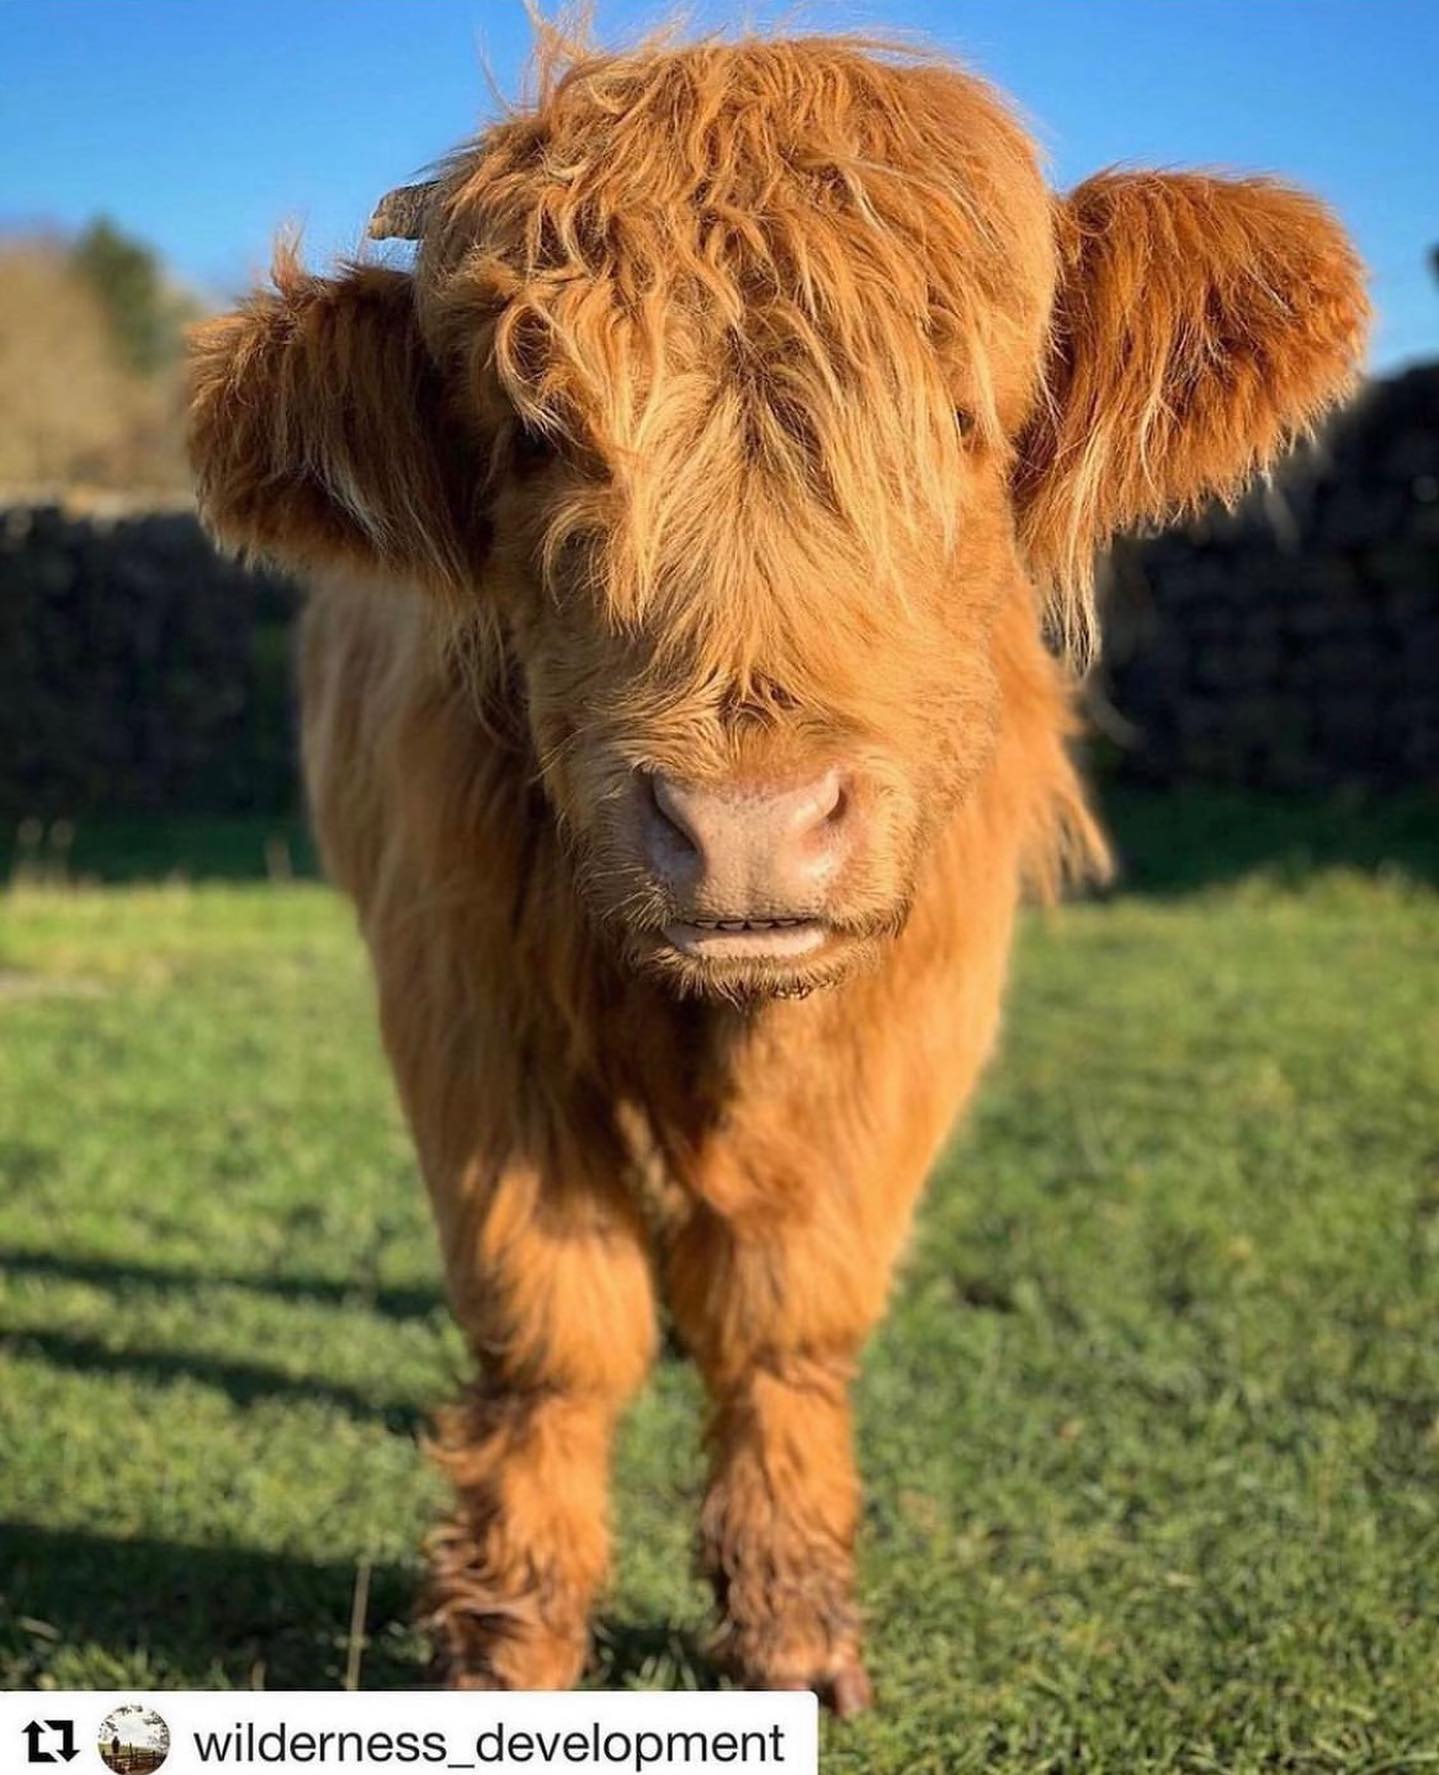 🐮 Wildlife Wednesday 🐮

We love seeing these fab Highland Cows out and about, they’re just so pho...